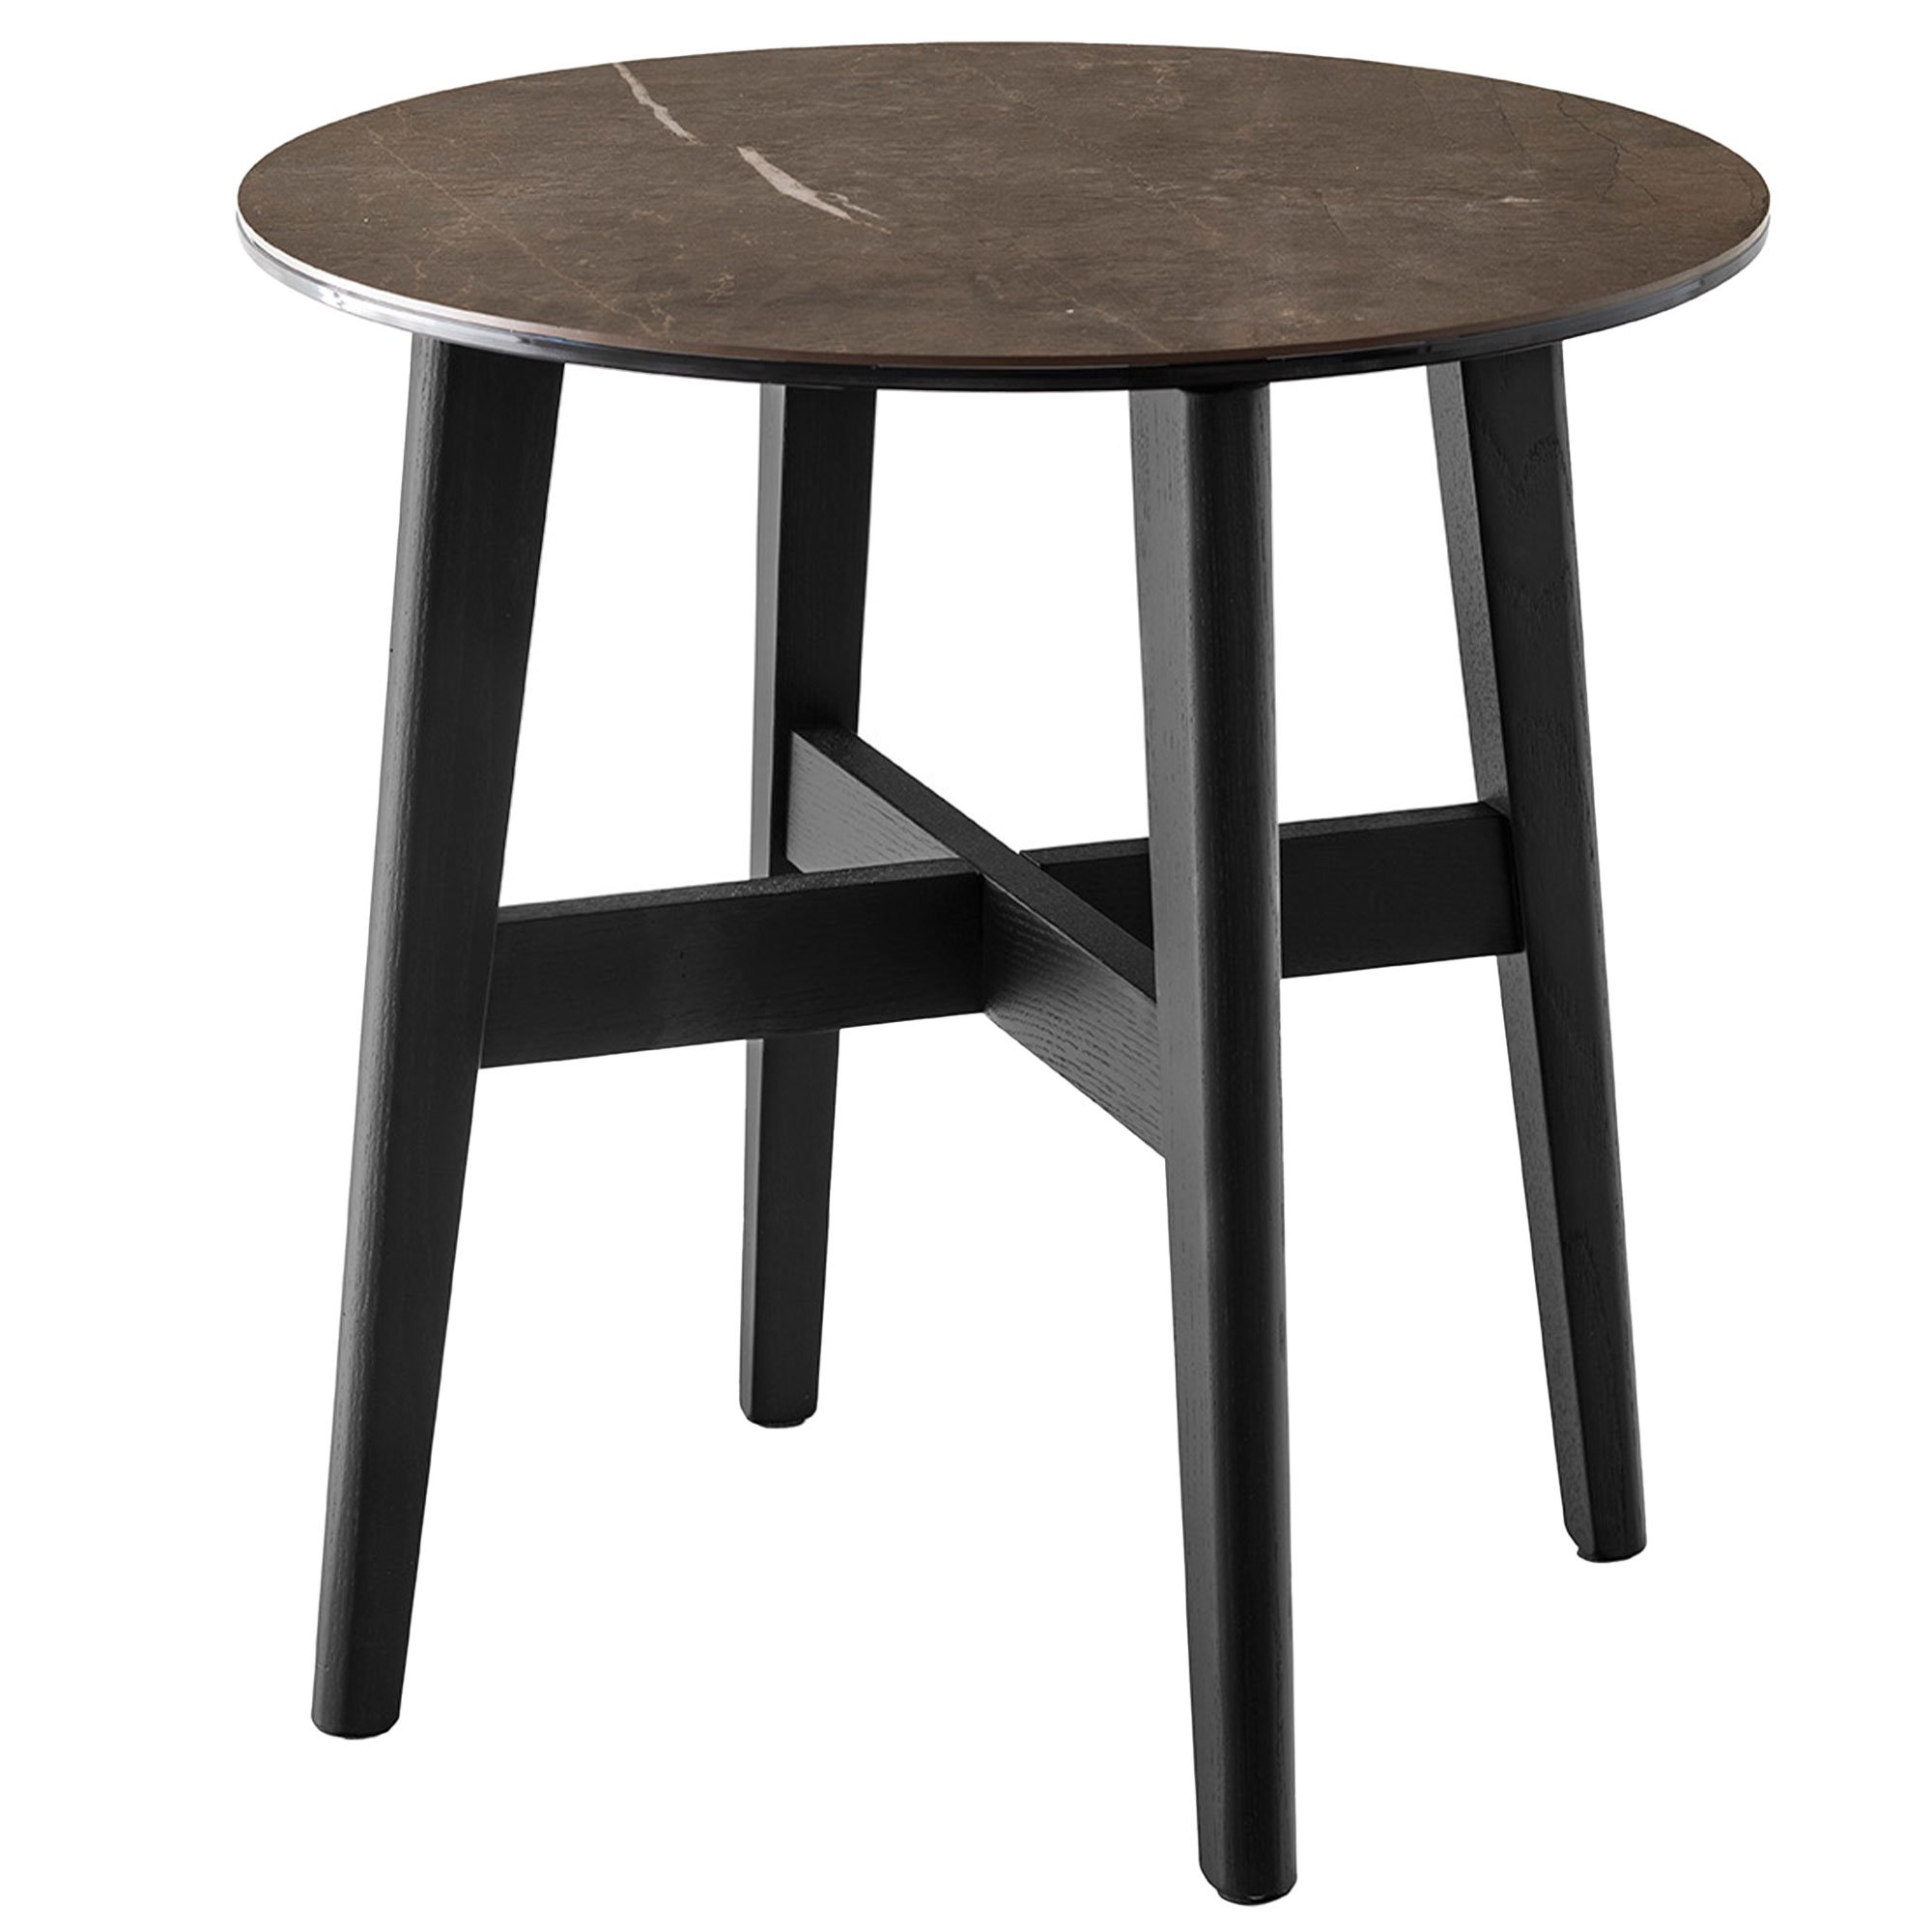 Calligaris Abrey Side Table | Barker & Stonehouse